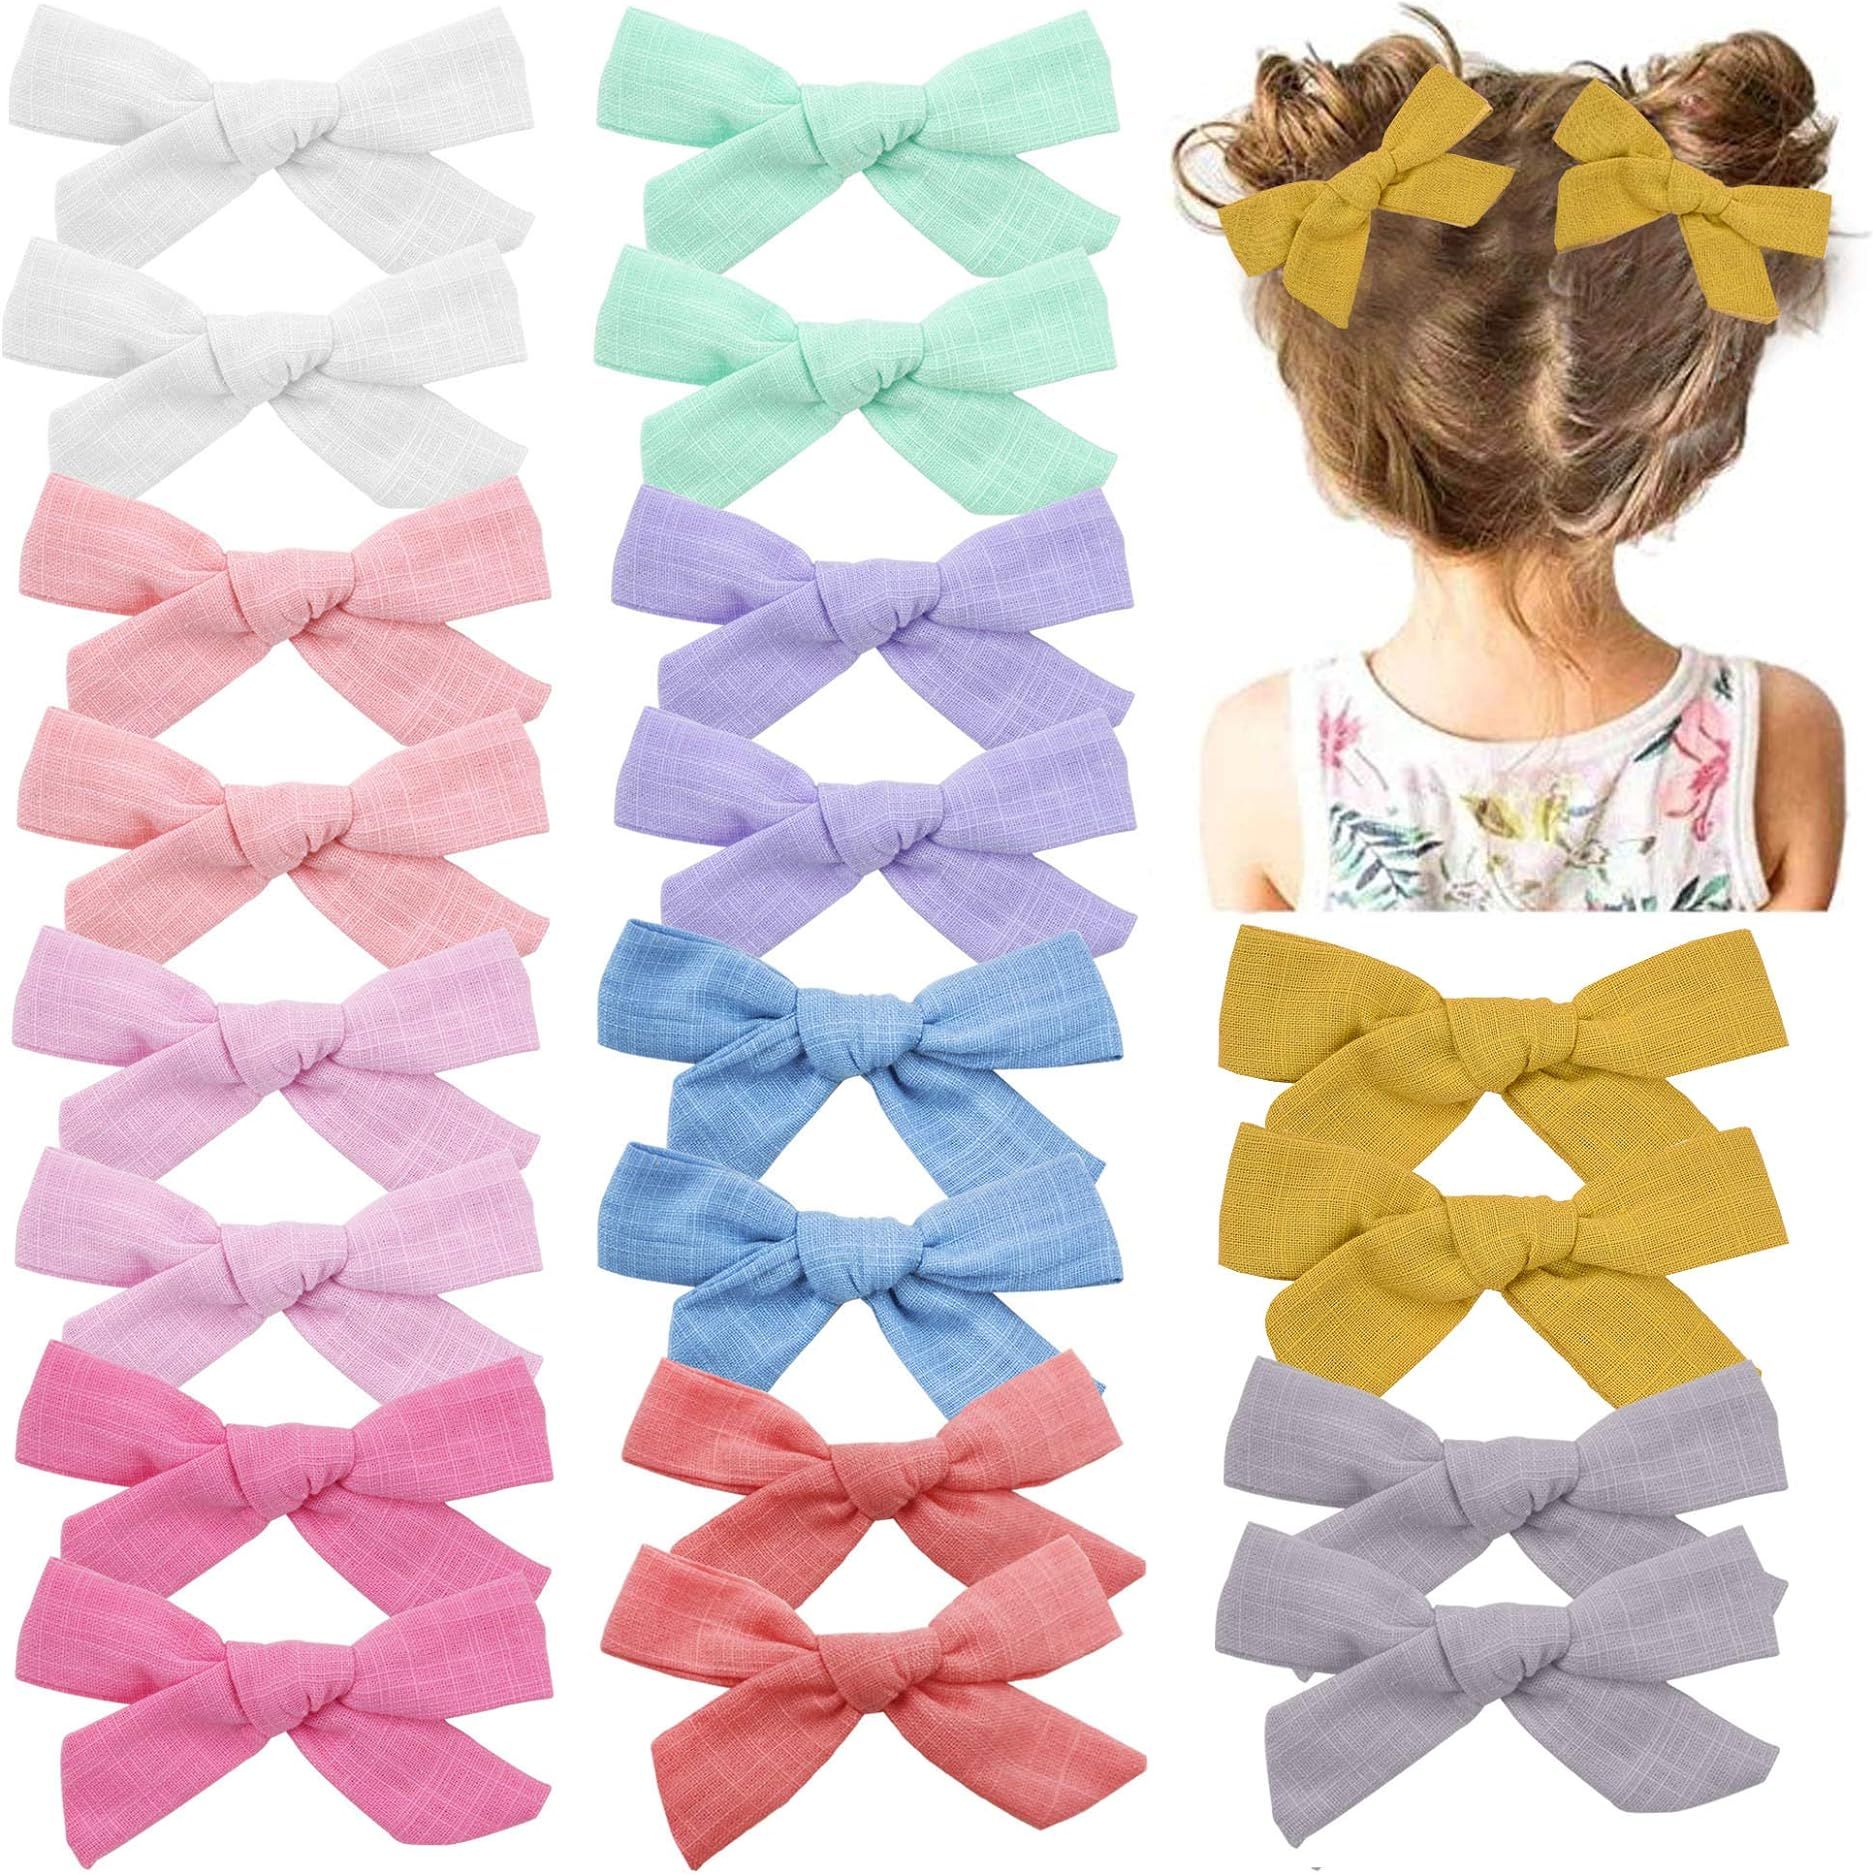 Prohouse 40 Pieces Baby Girls Hair Bows Clips Hair Barrettes Accessory for Babies Infant Toddlers Ki | Amazon (US)